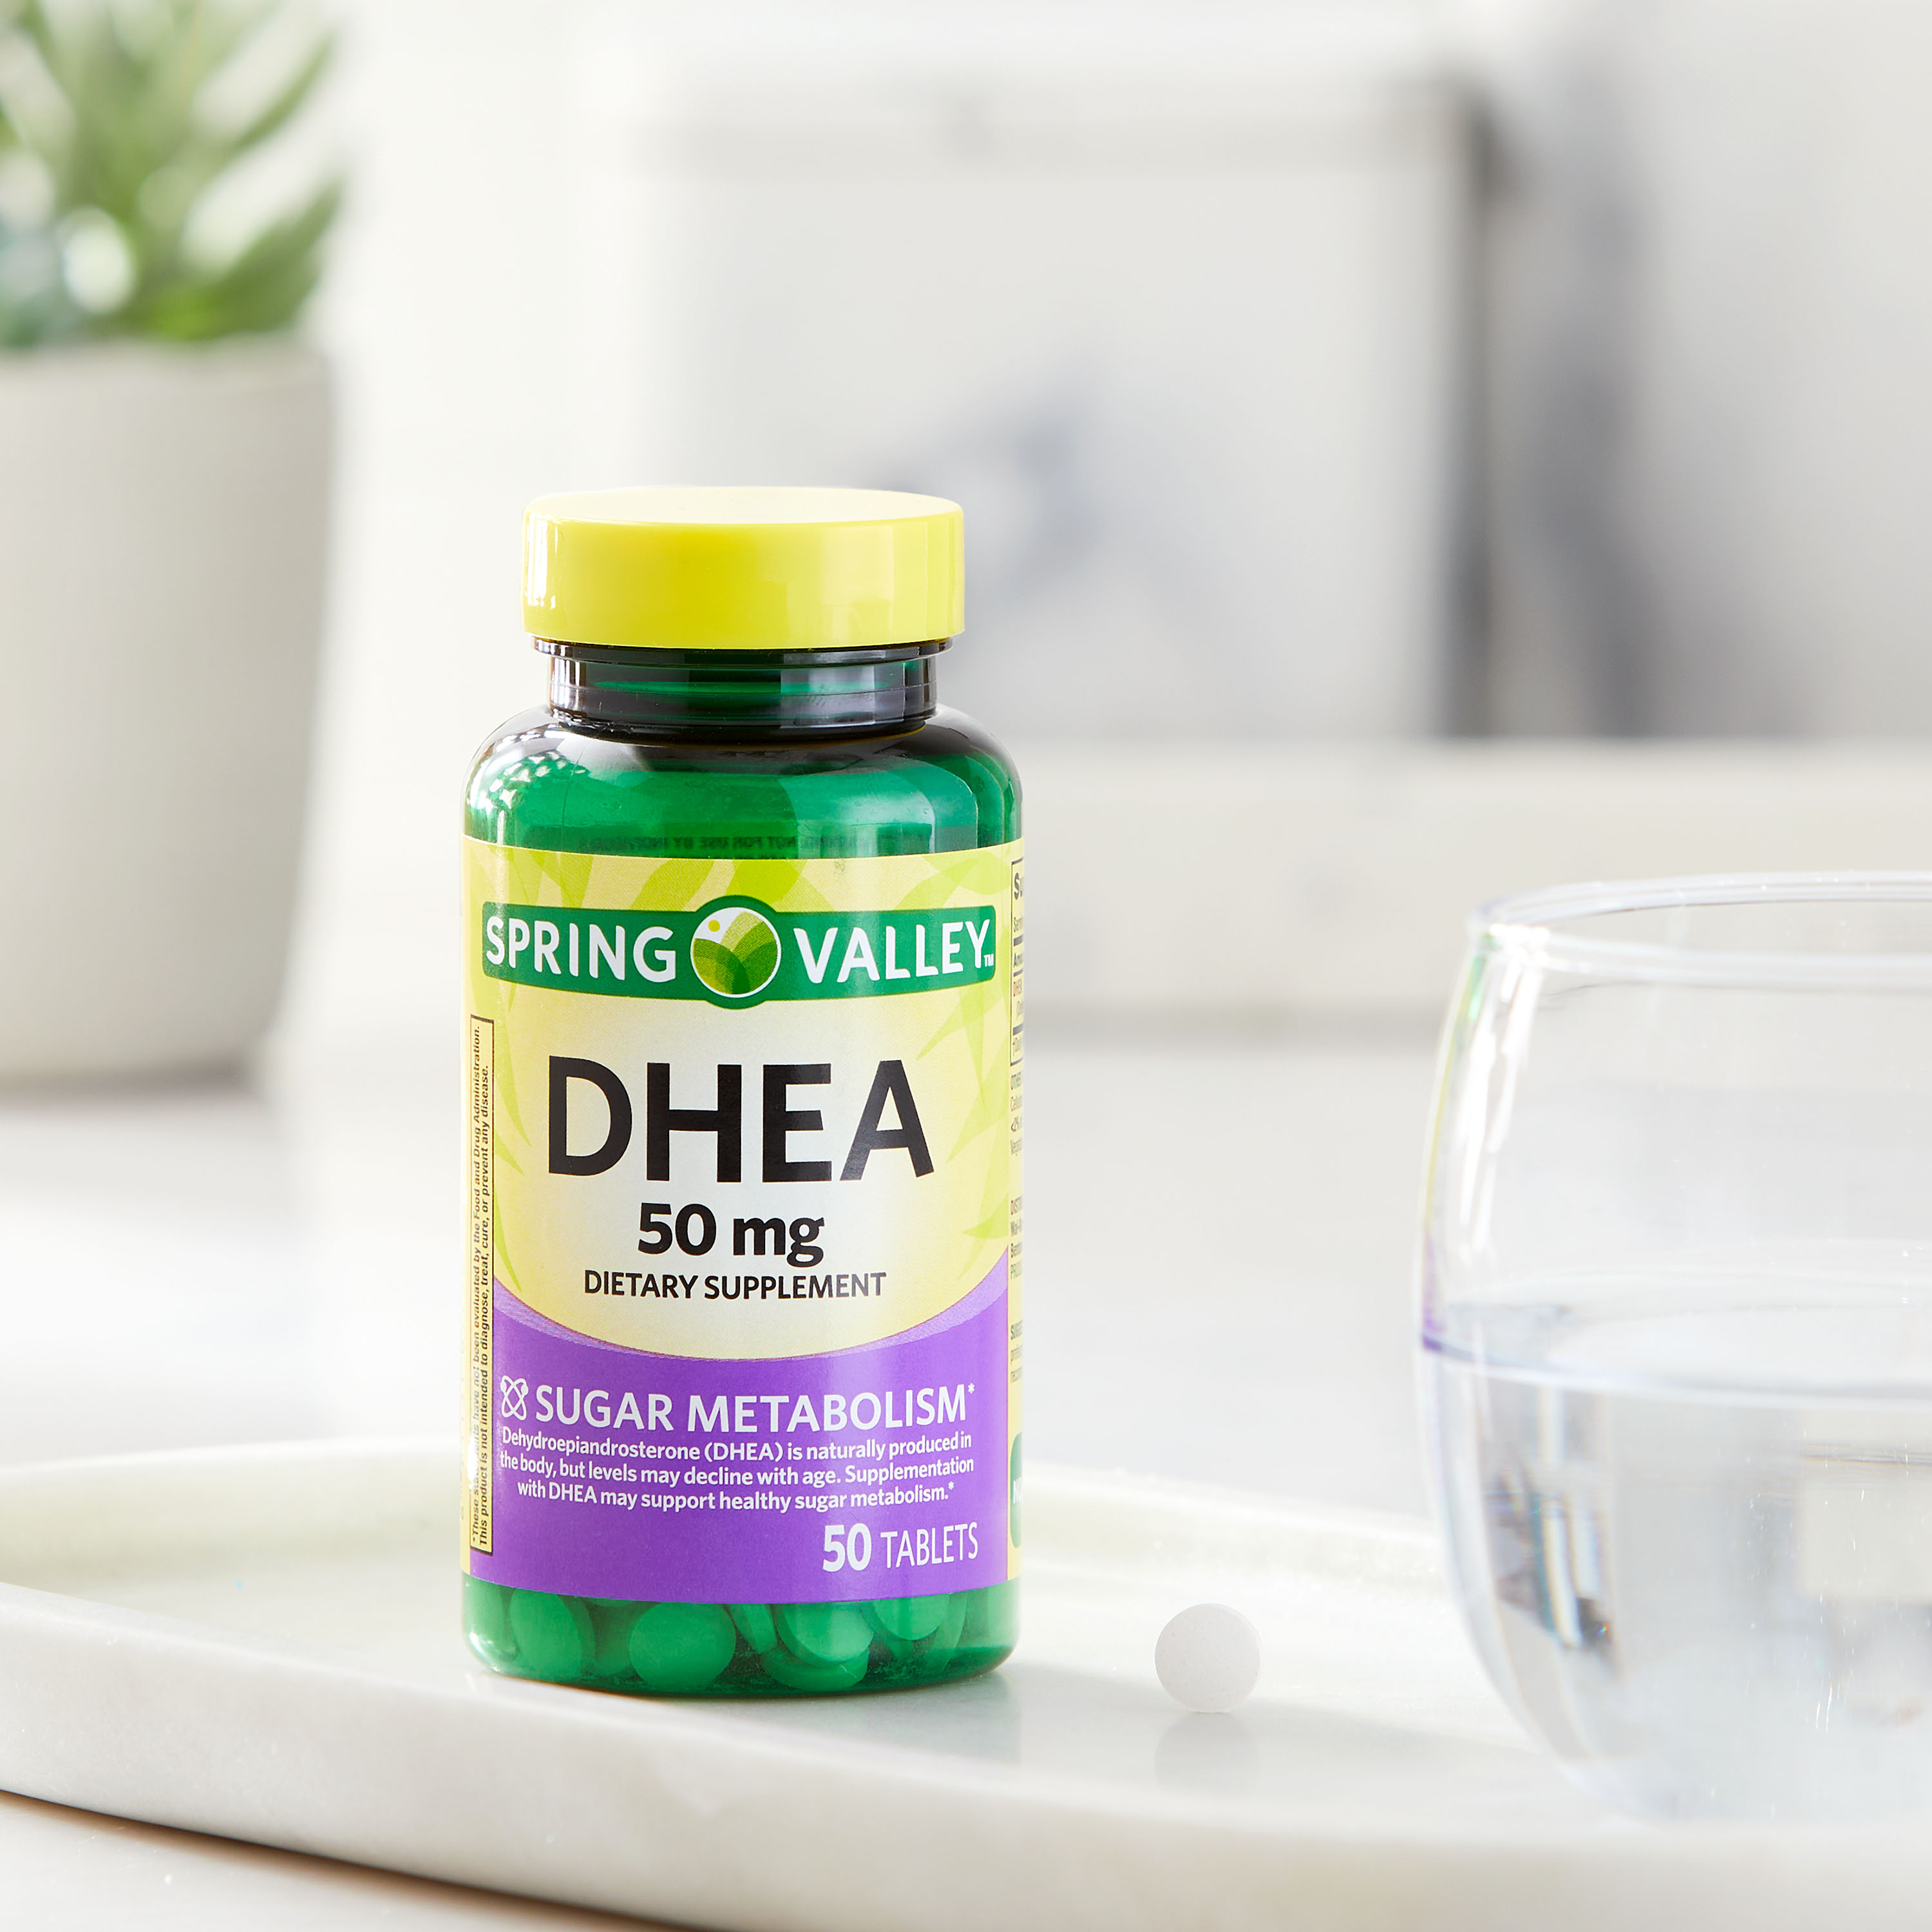 Spring Valley DHEA Tablets, 50 mg, 50 Count - image 4 of 10